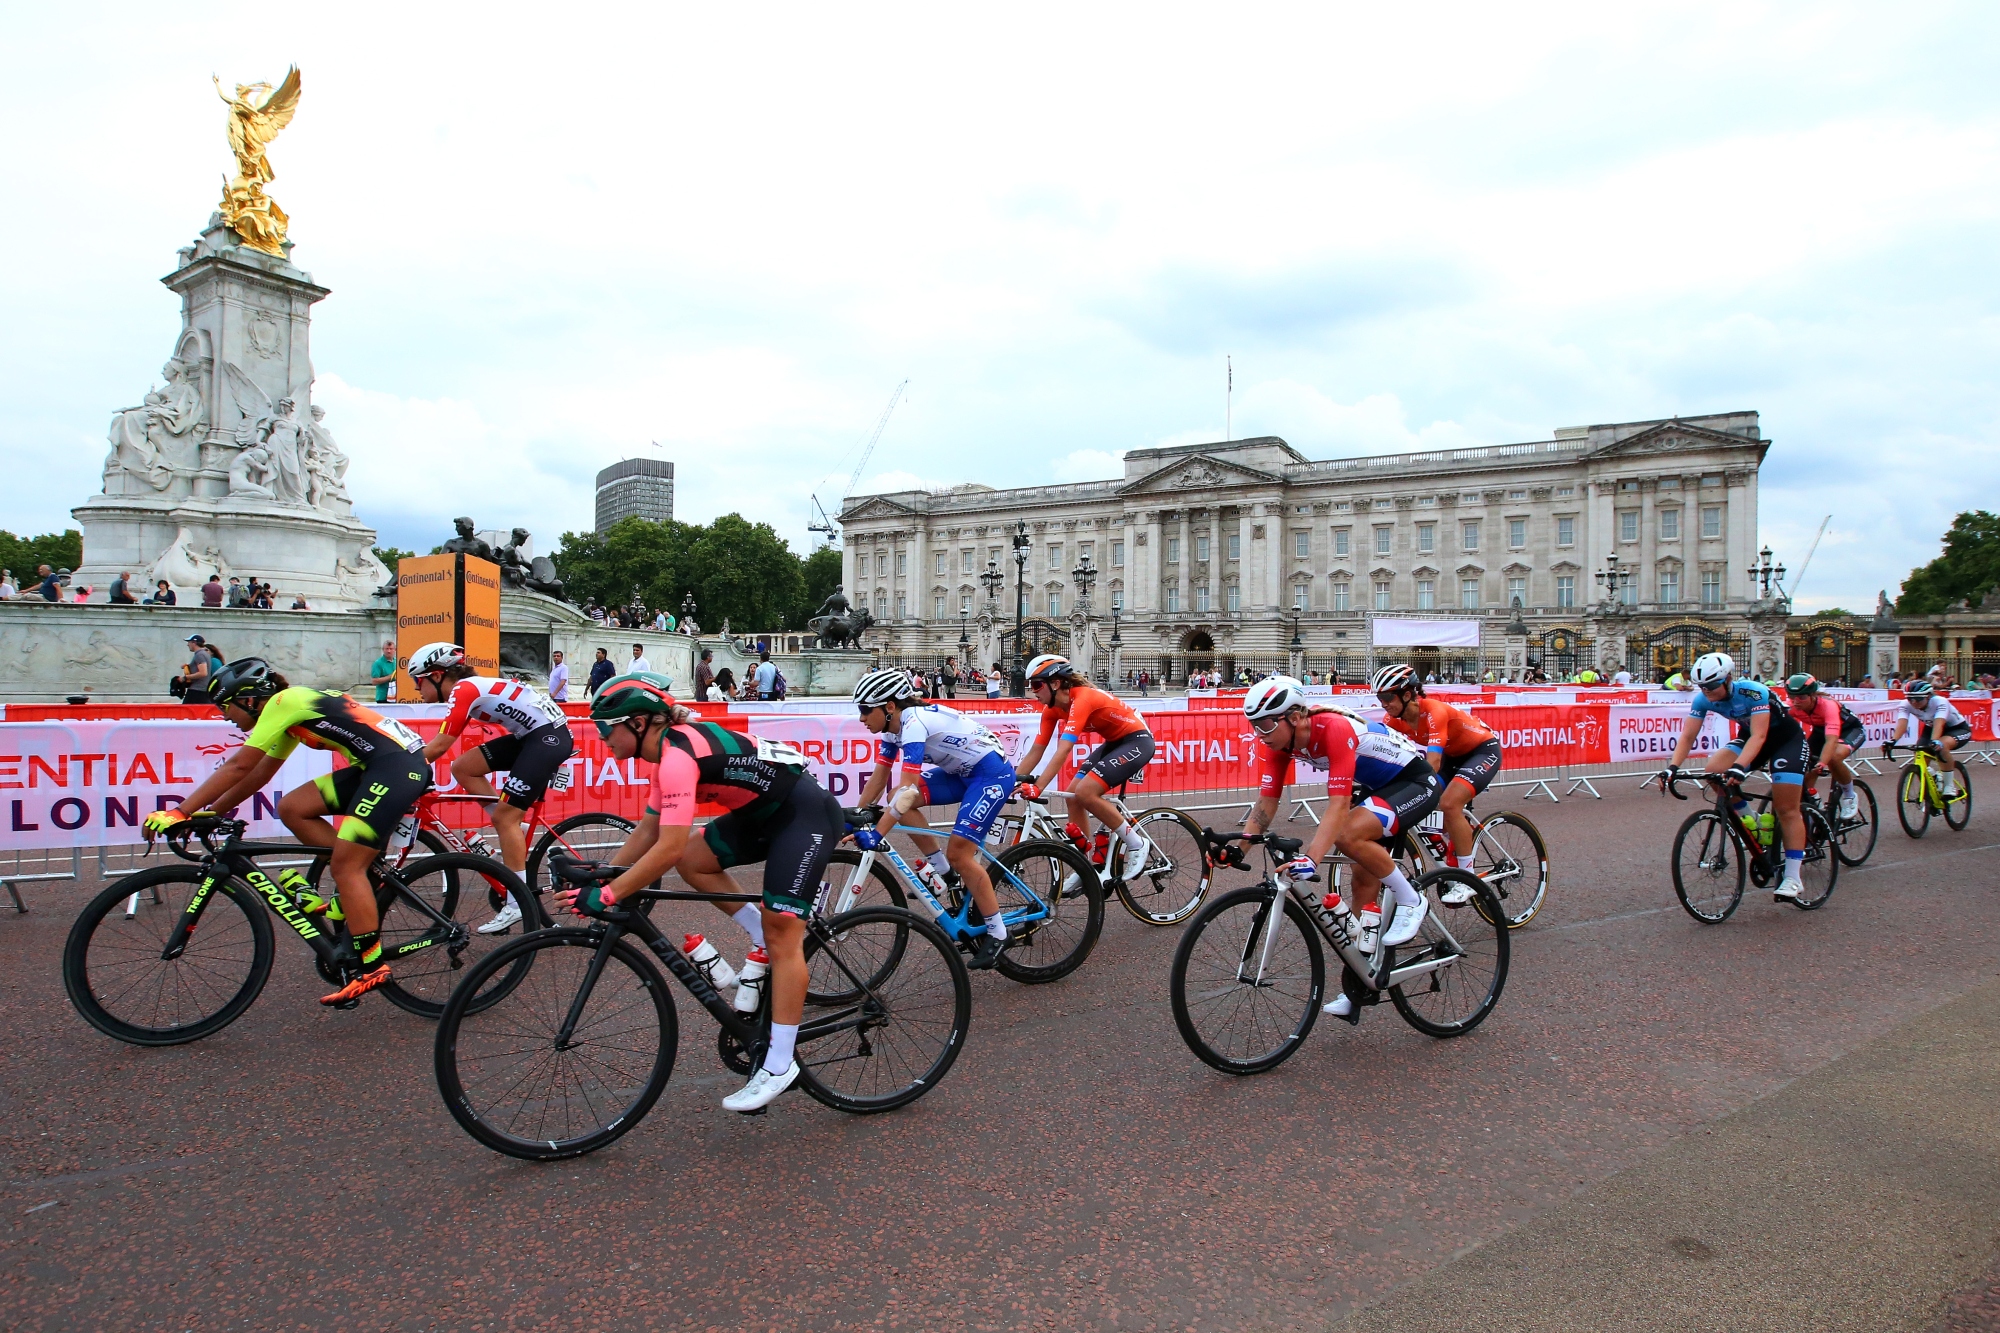 The London Ride100